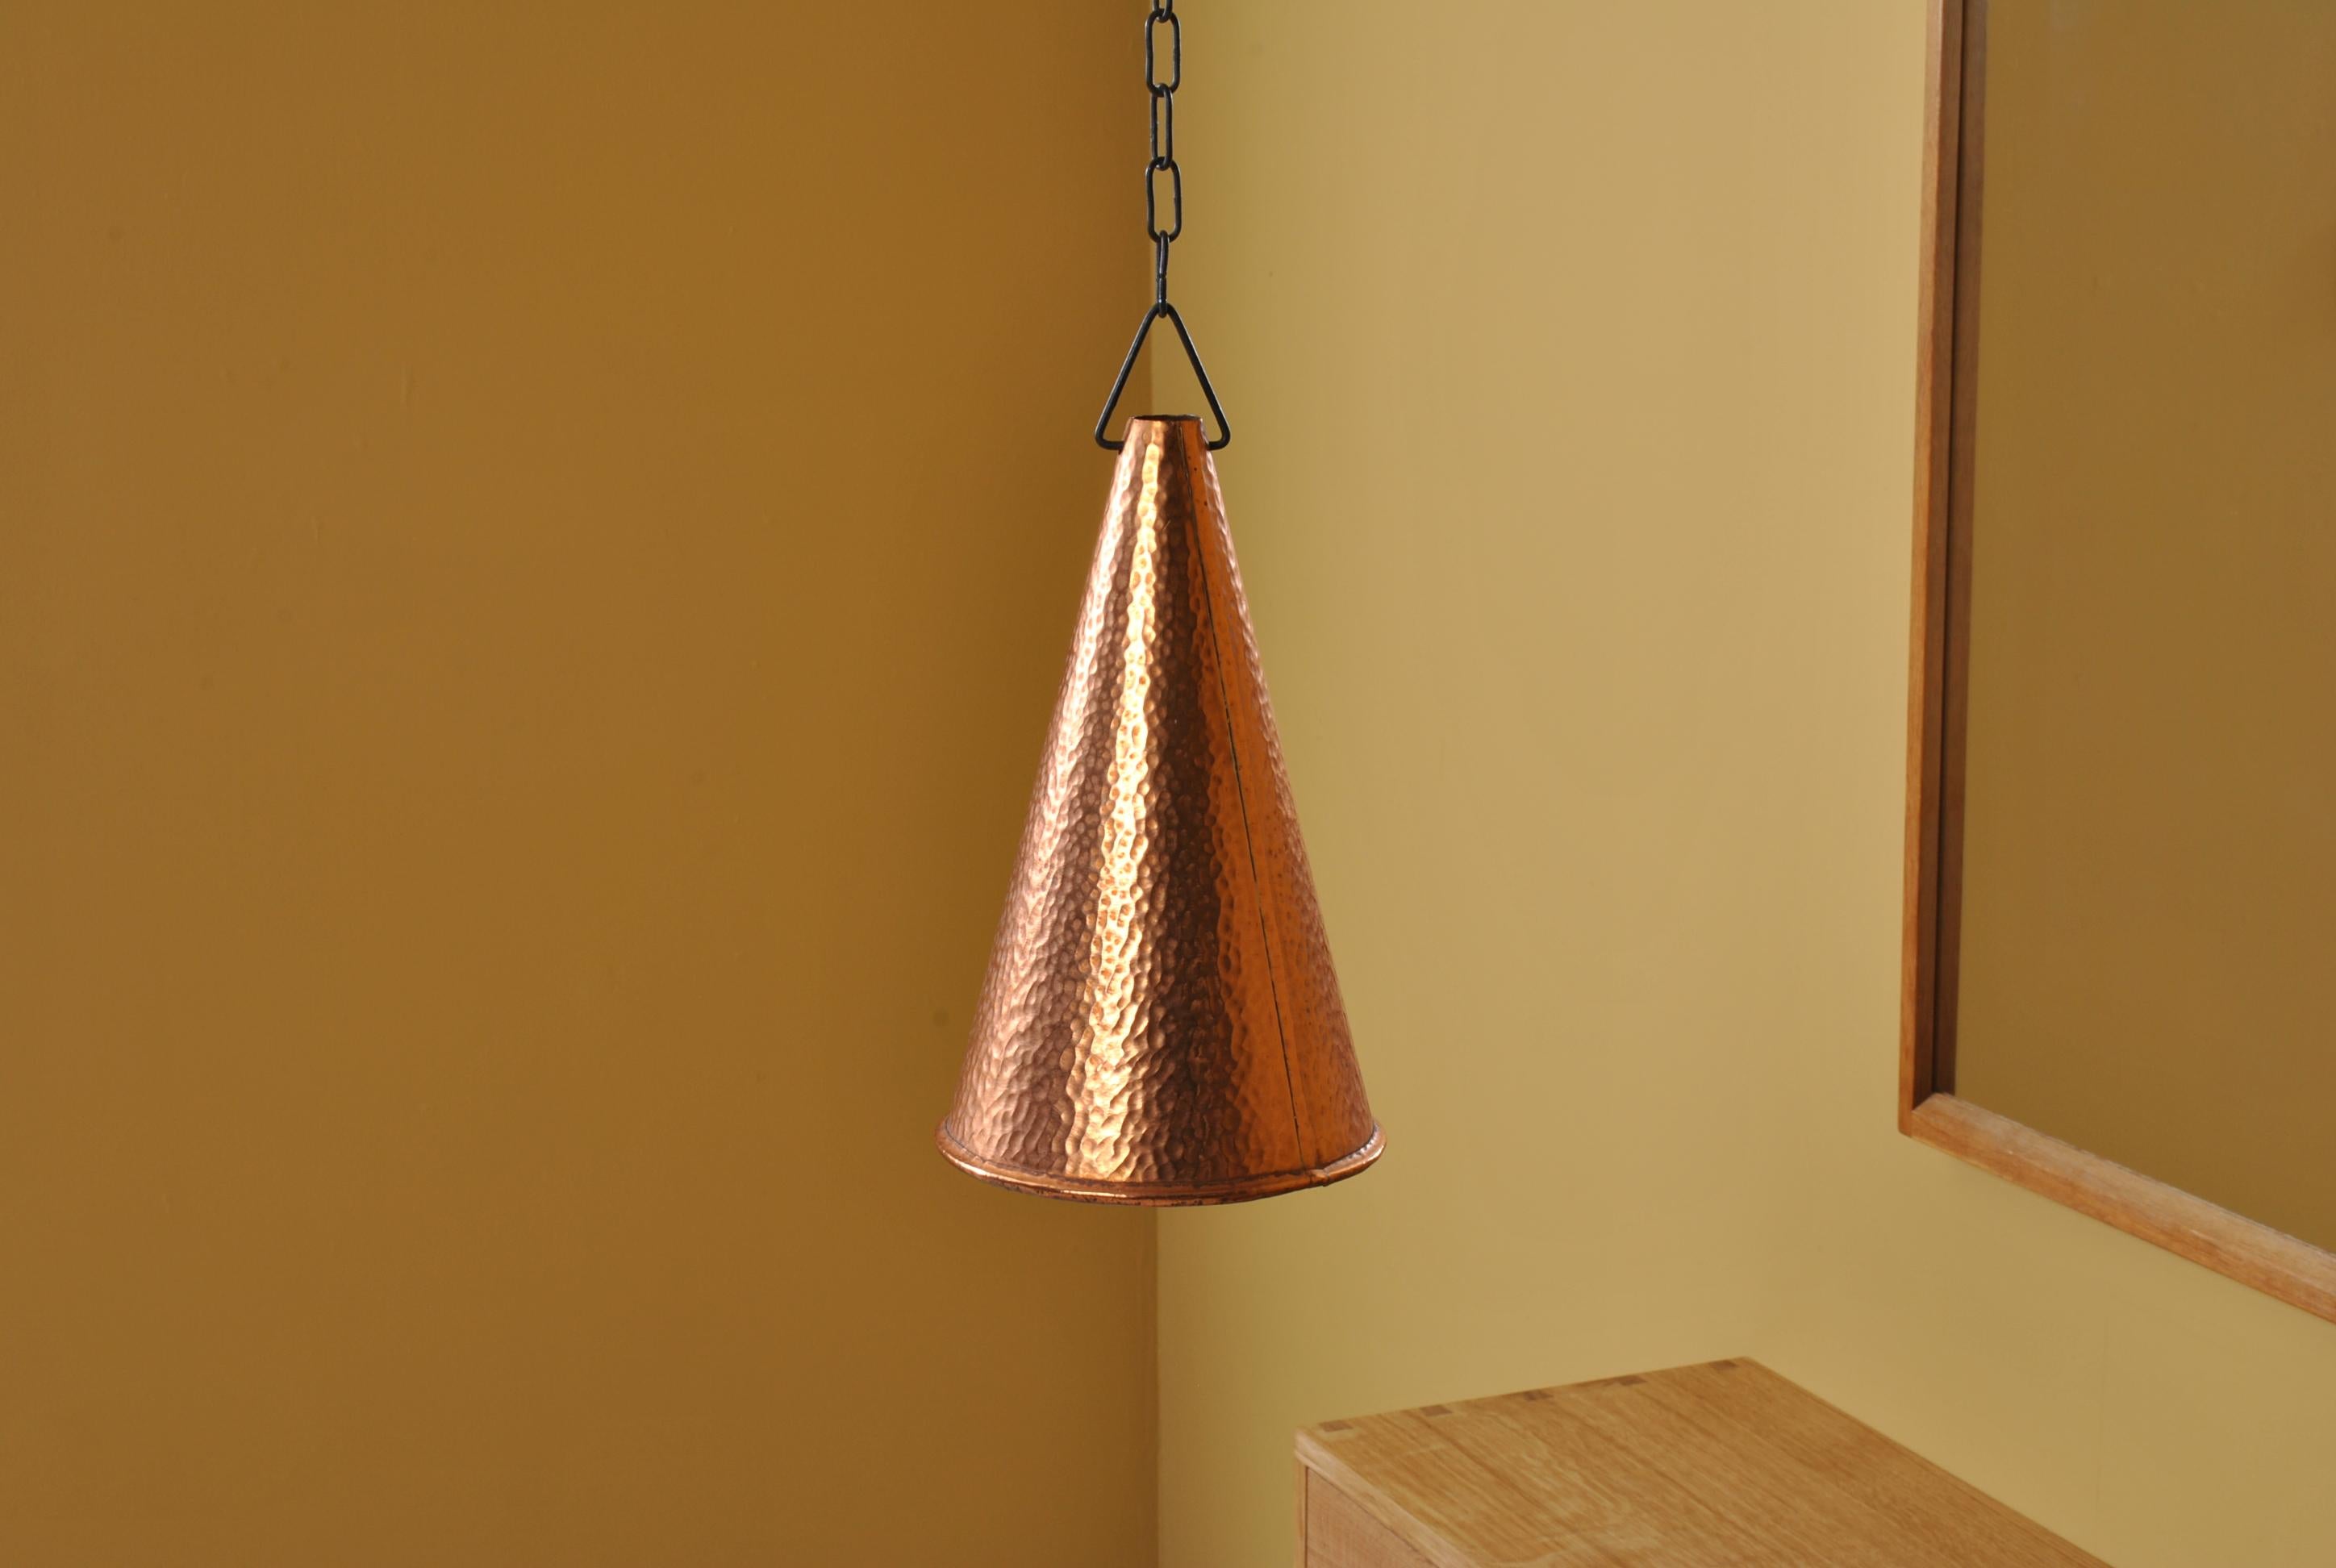 Pair of Hammered Copper Pendant Shades, Denmark 2